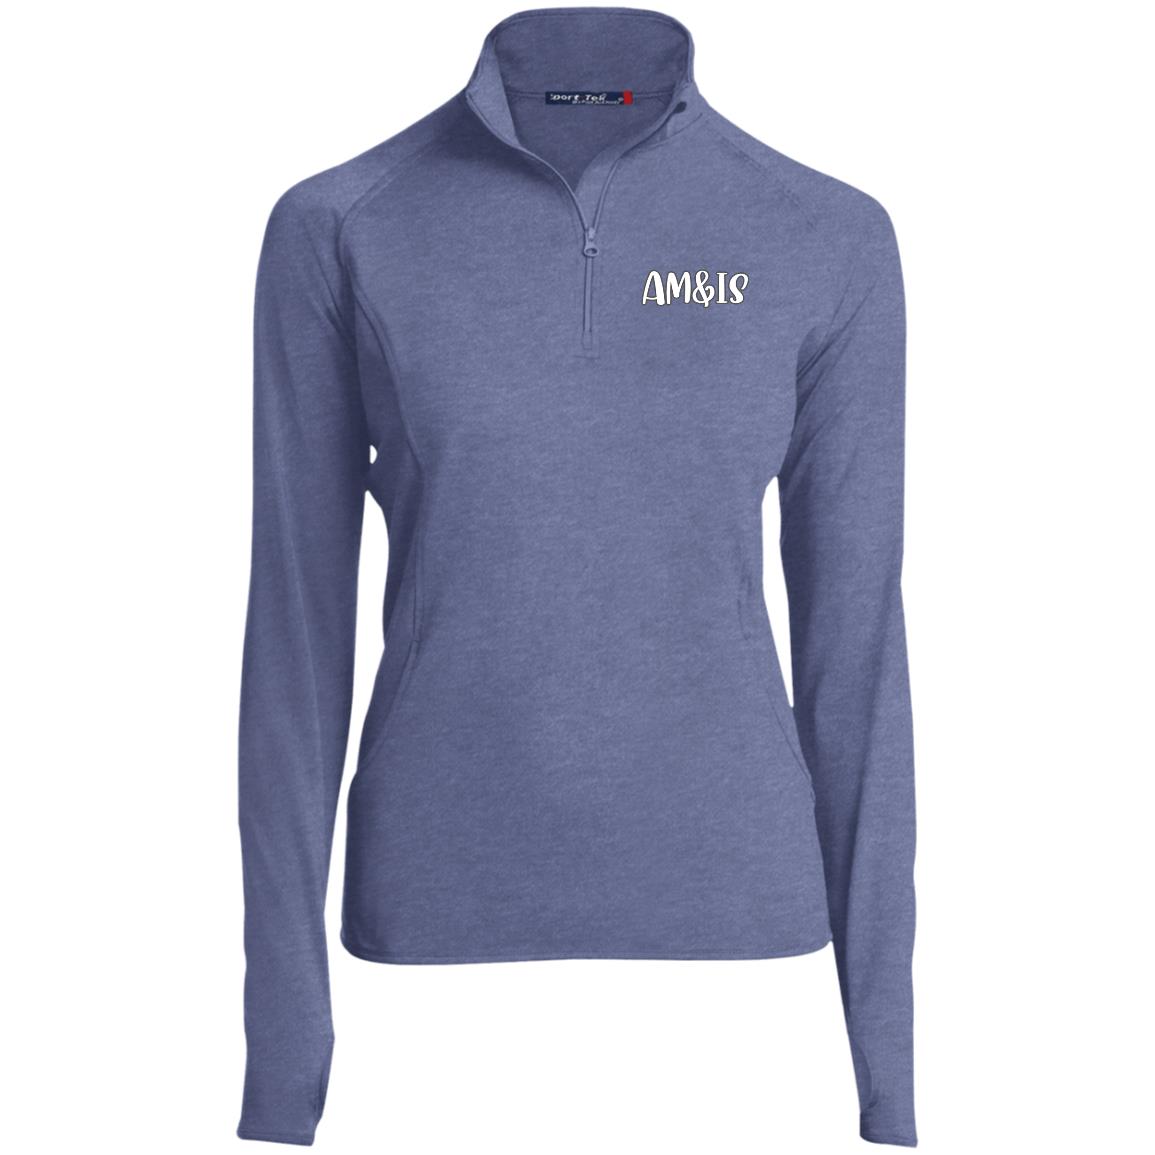 TRUE NAVY HEATHER - AM&IS Activewear Ladies' 1/2 Zip Performance Pullover - womens shirt at TFC&H Co.